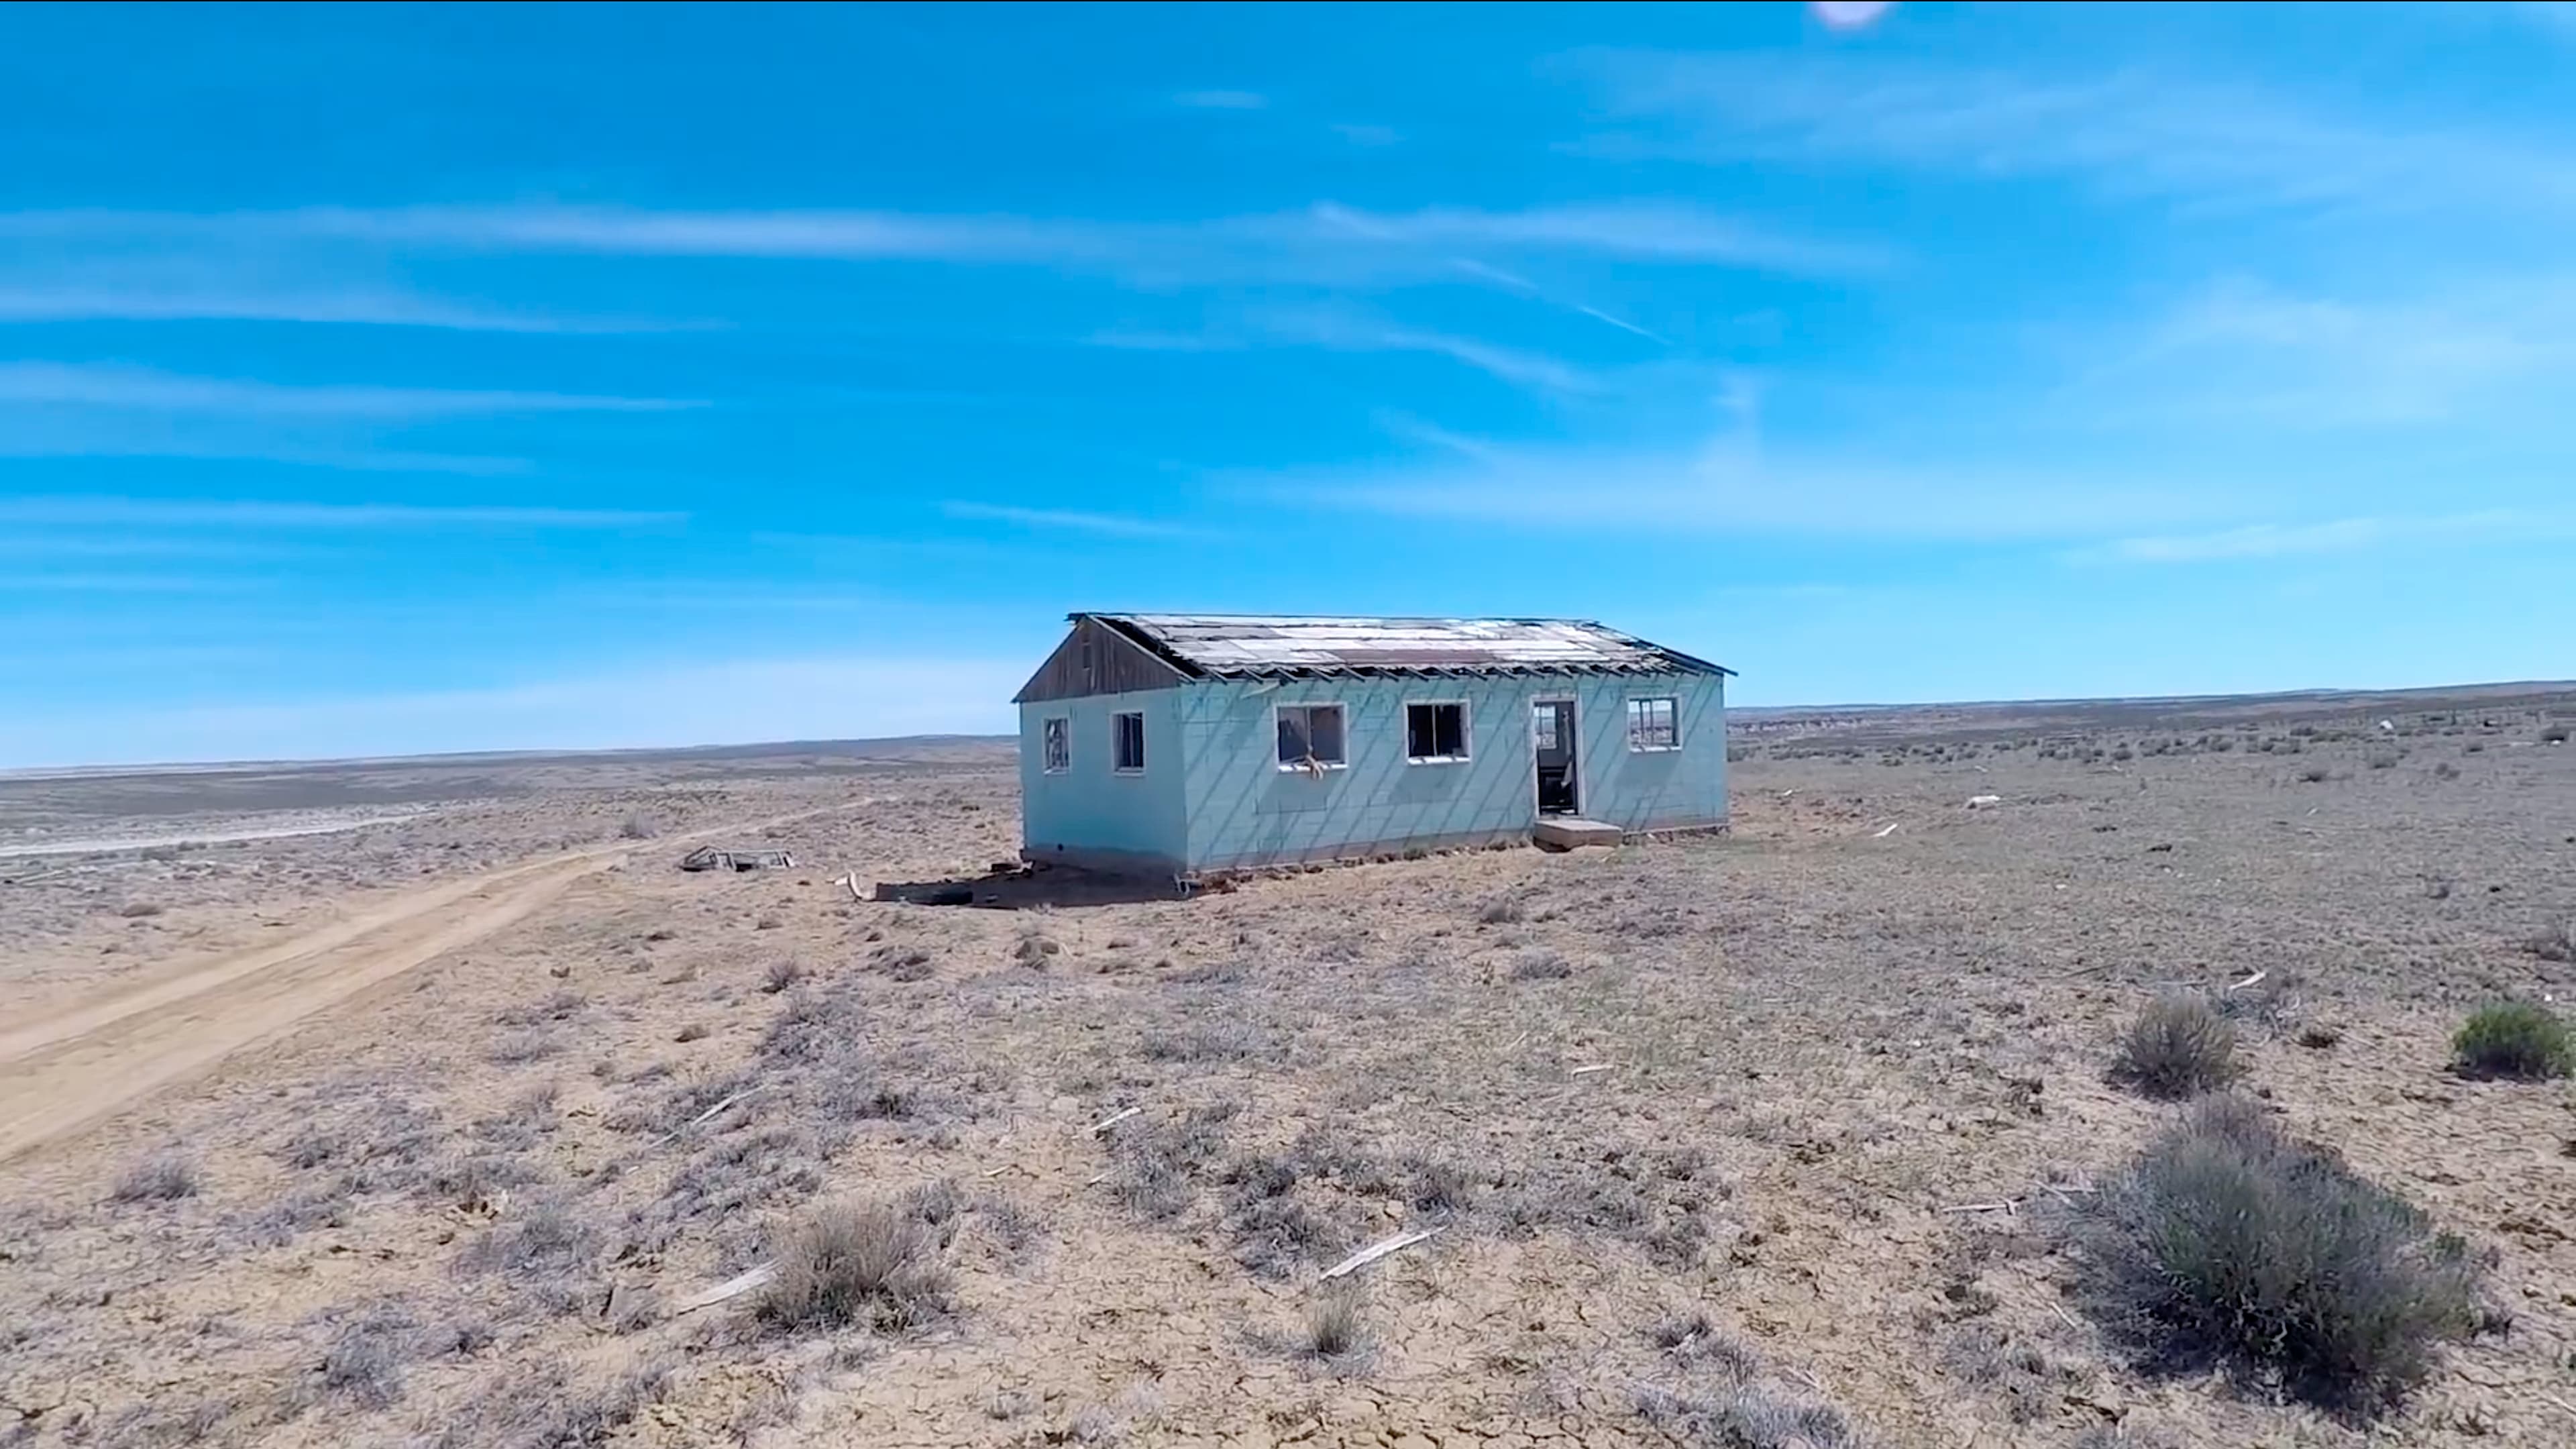 Atomic Pilgrimage: Ghost Towns, Nuclear Relics, and Lost Civilizations on the Road to the Trinity Site (2019)